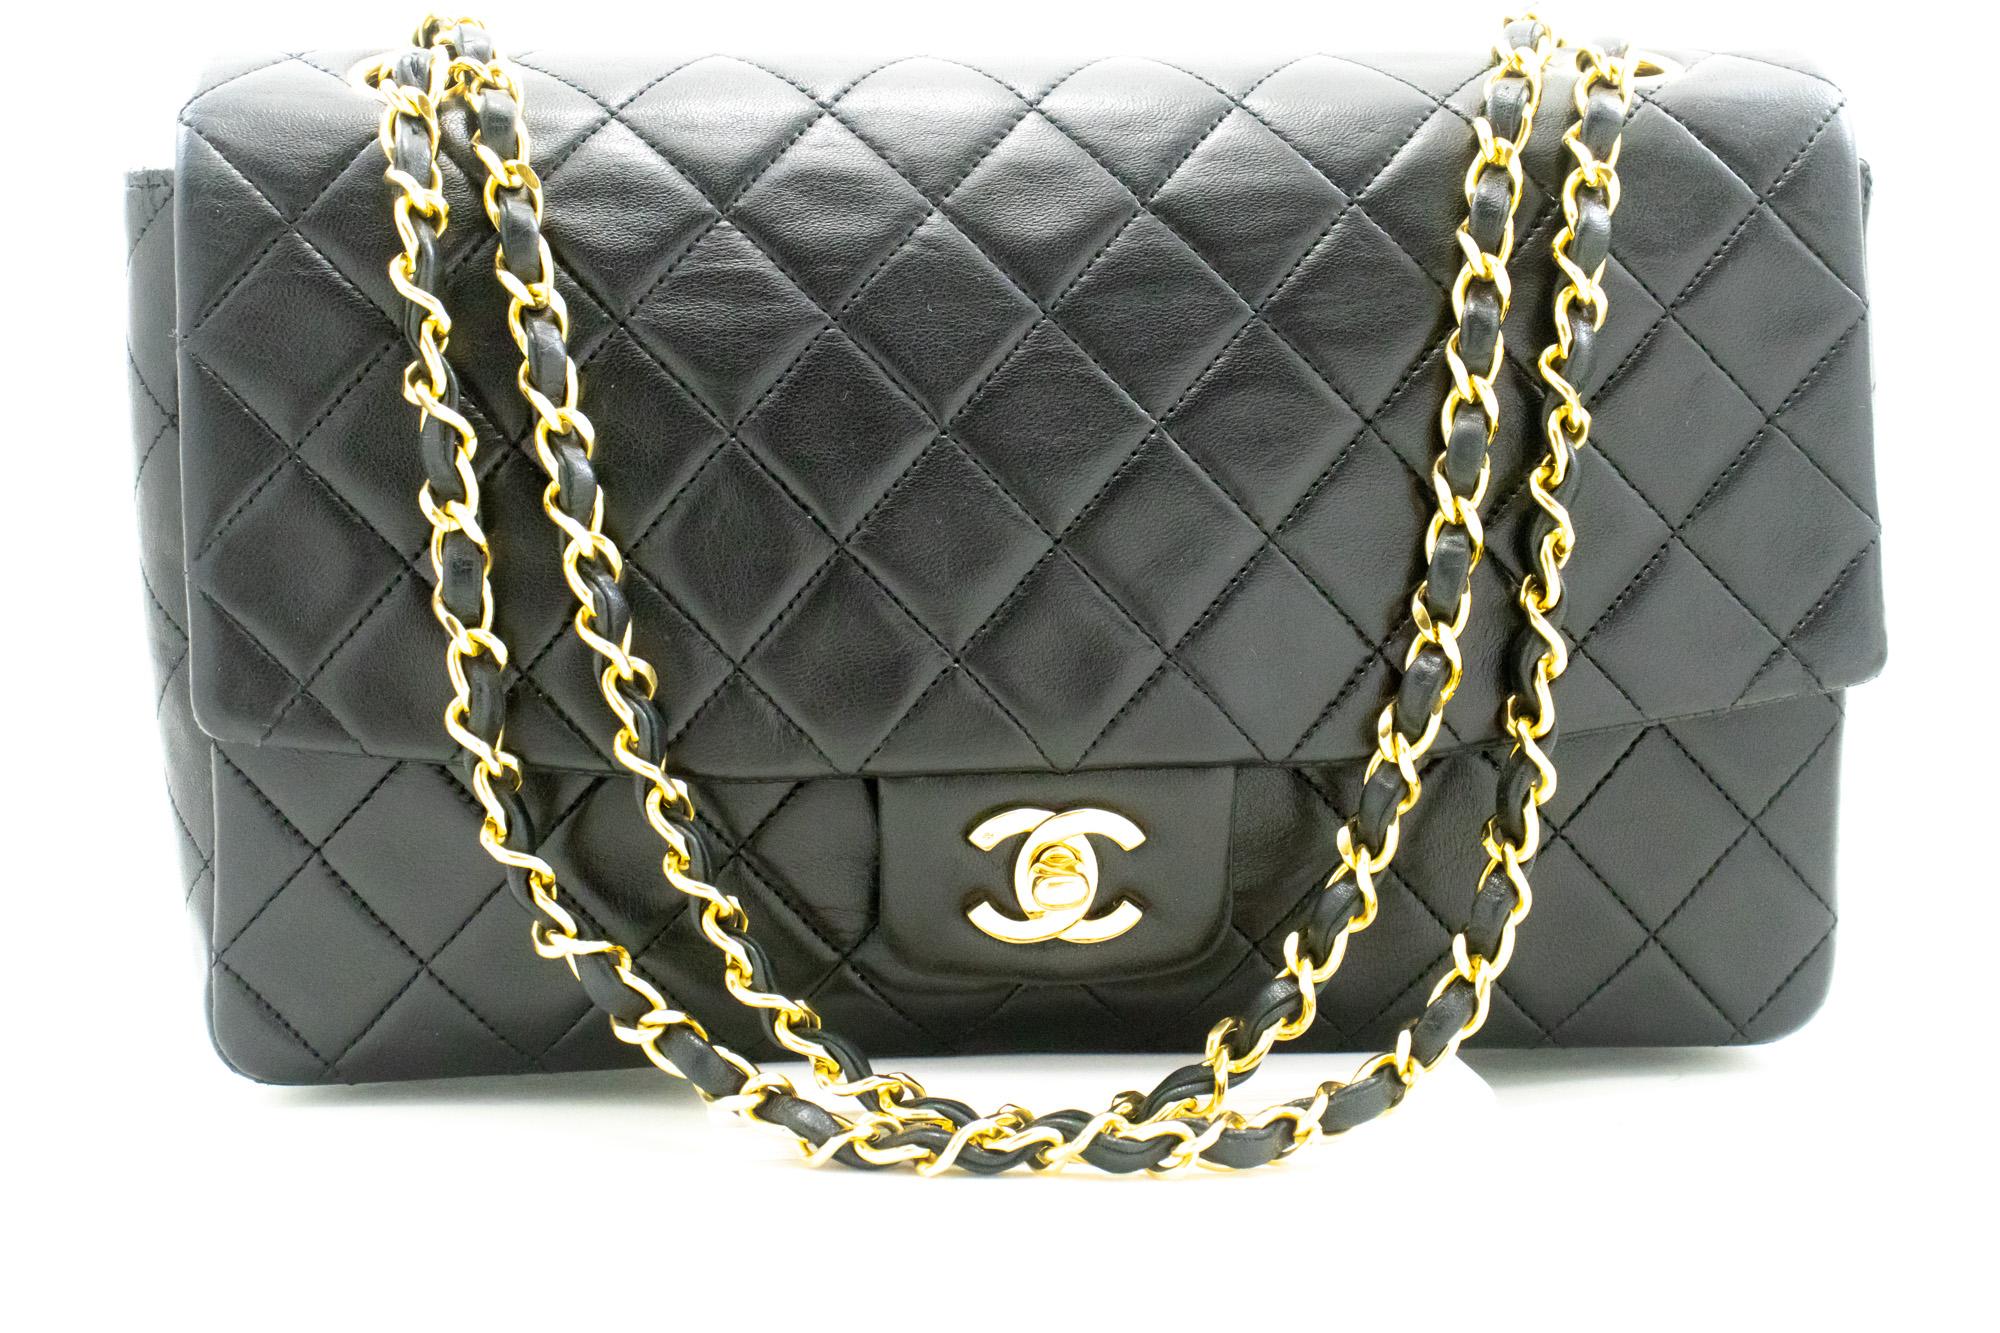 An authentic CHANEL Vintage Single Flap Chain Shoulder Bag Quilted made of black Lambskin. The color is Black. The outside material is Leather. The pattern is Solid. This item is Vintage / Classic. The year of manufacture would be